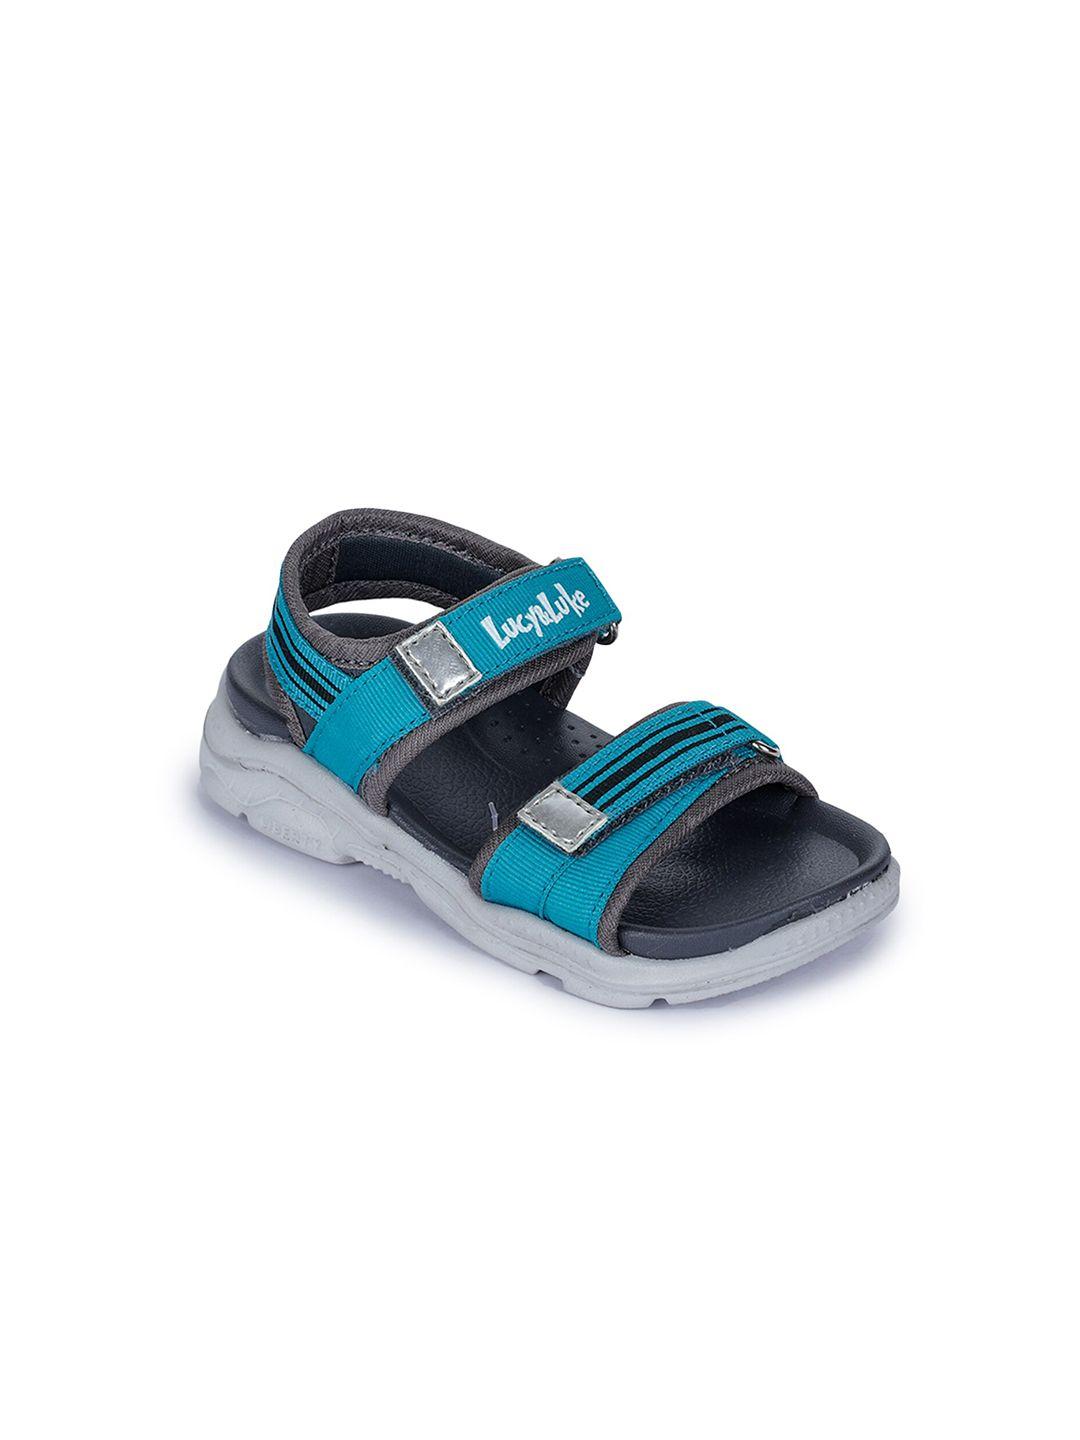 liberty-kids-turquoise-blue-&-grey-sports-sandals